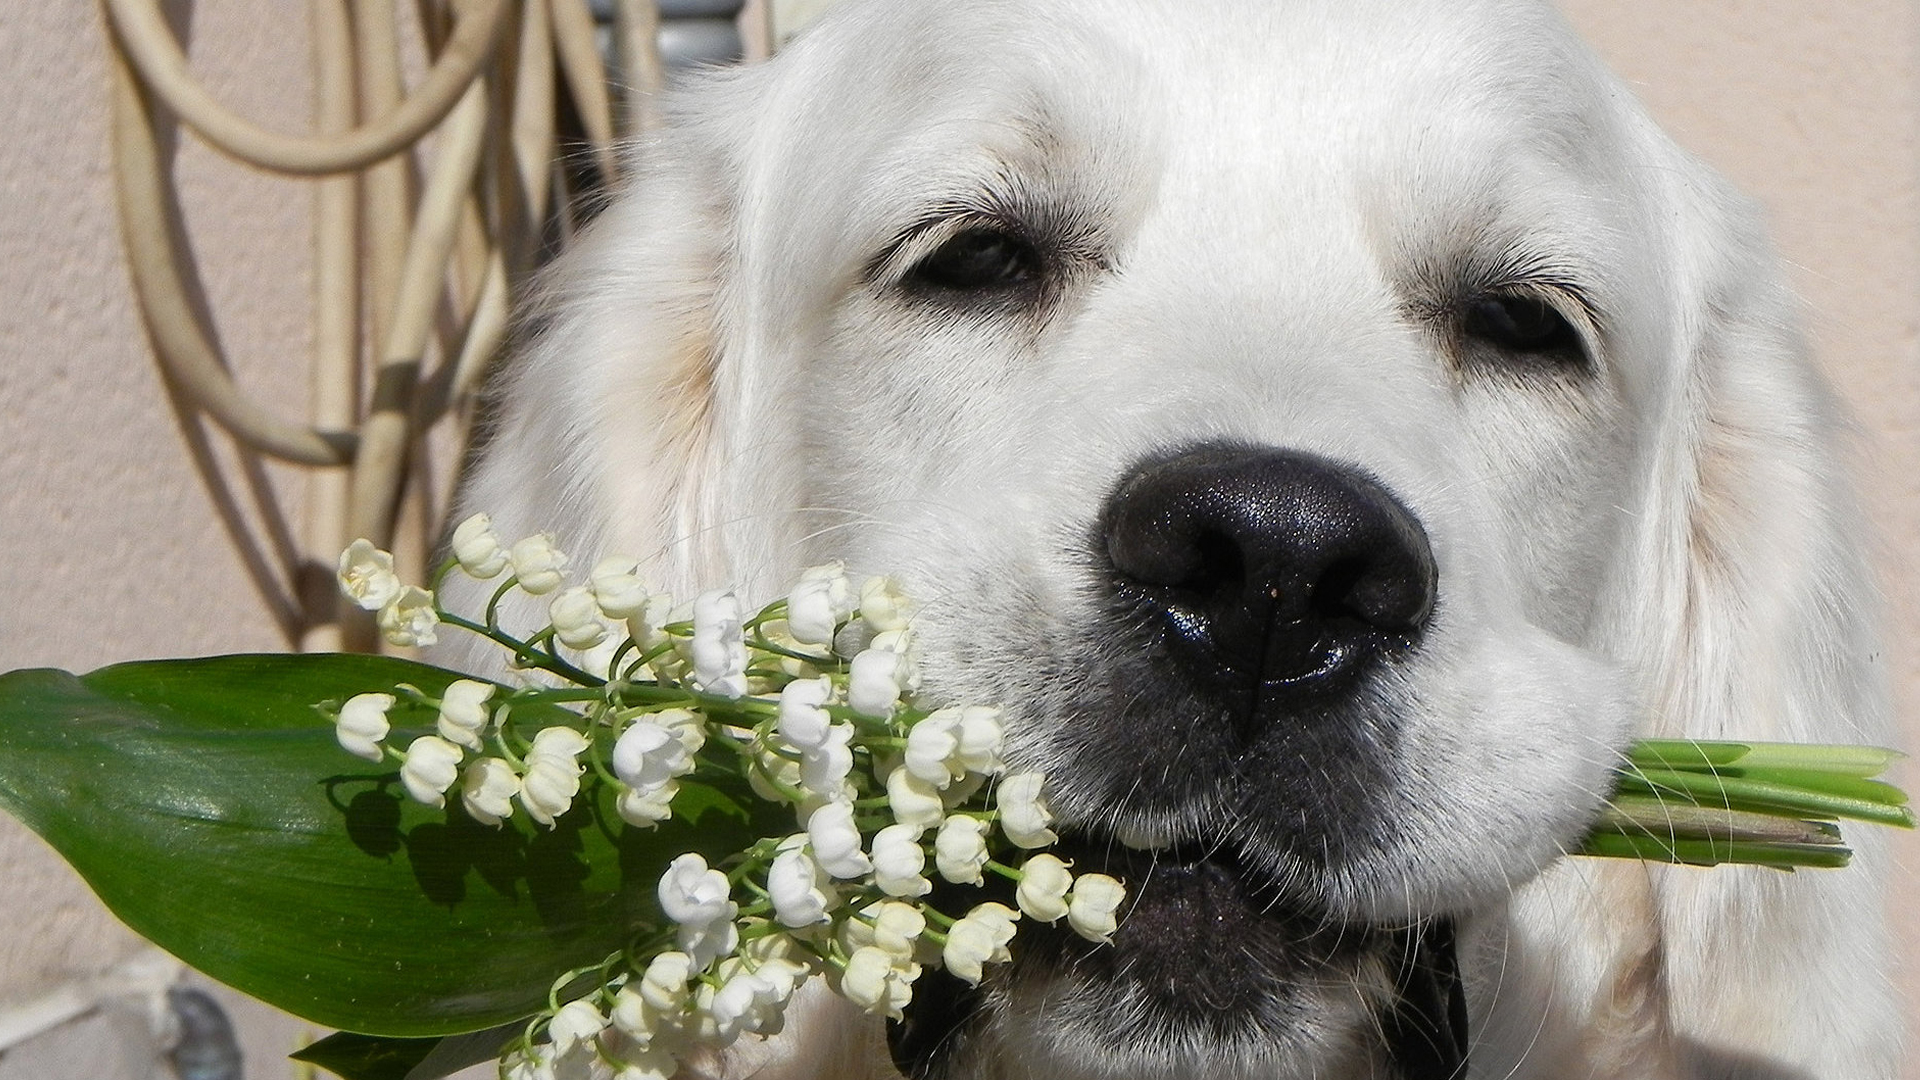 [47+] Puppies and Flowers Wallpapers on WallpaperSafari